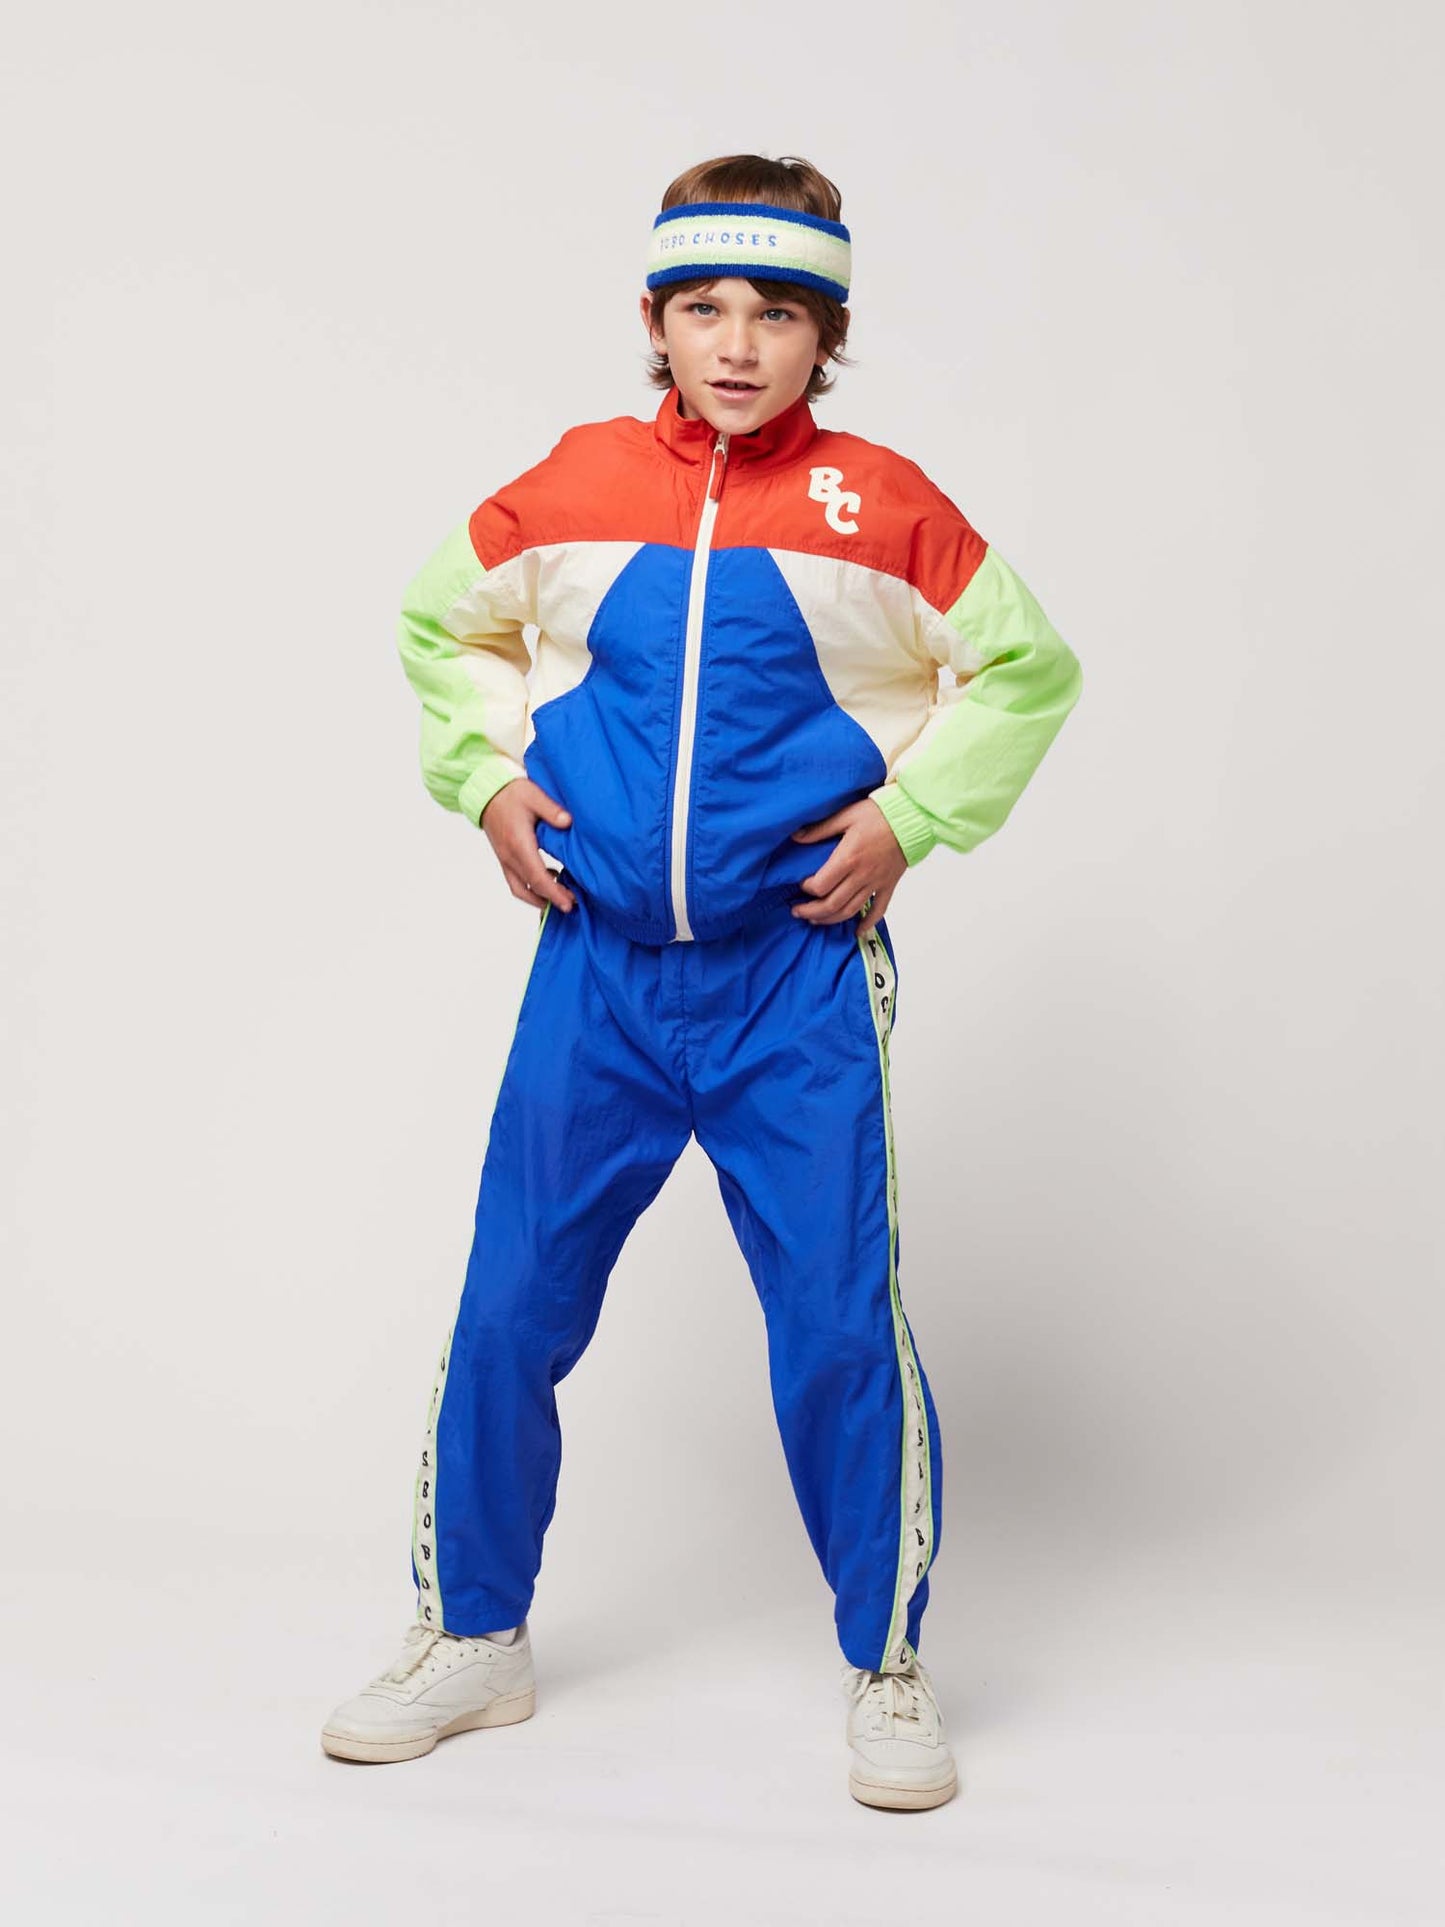 Load image into Gallery viewer, BC Colour Block Tracksuit Jacket
